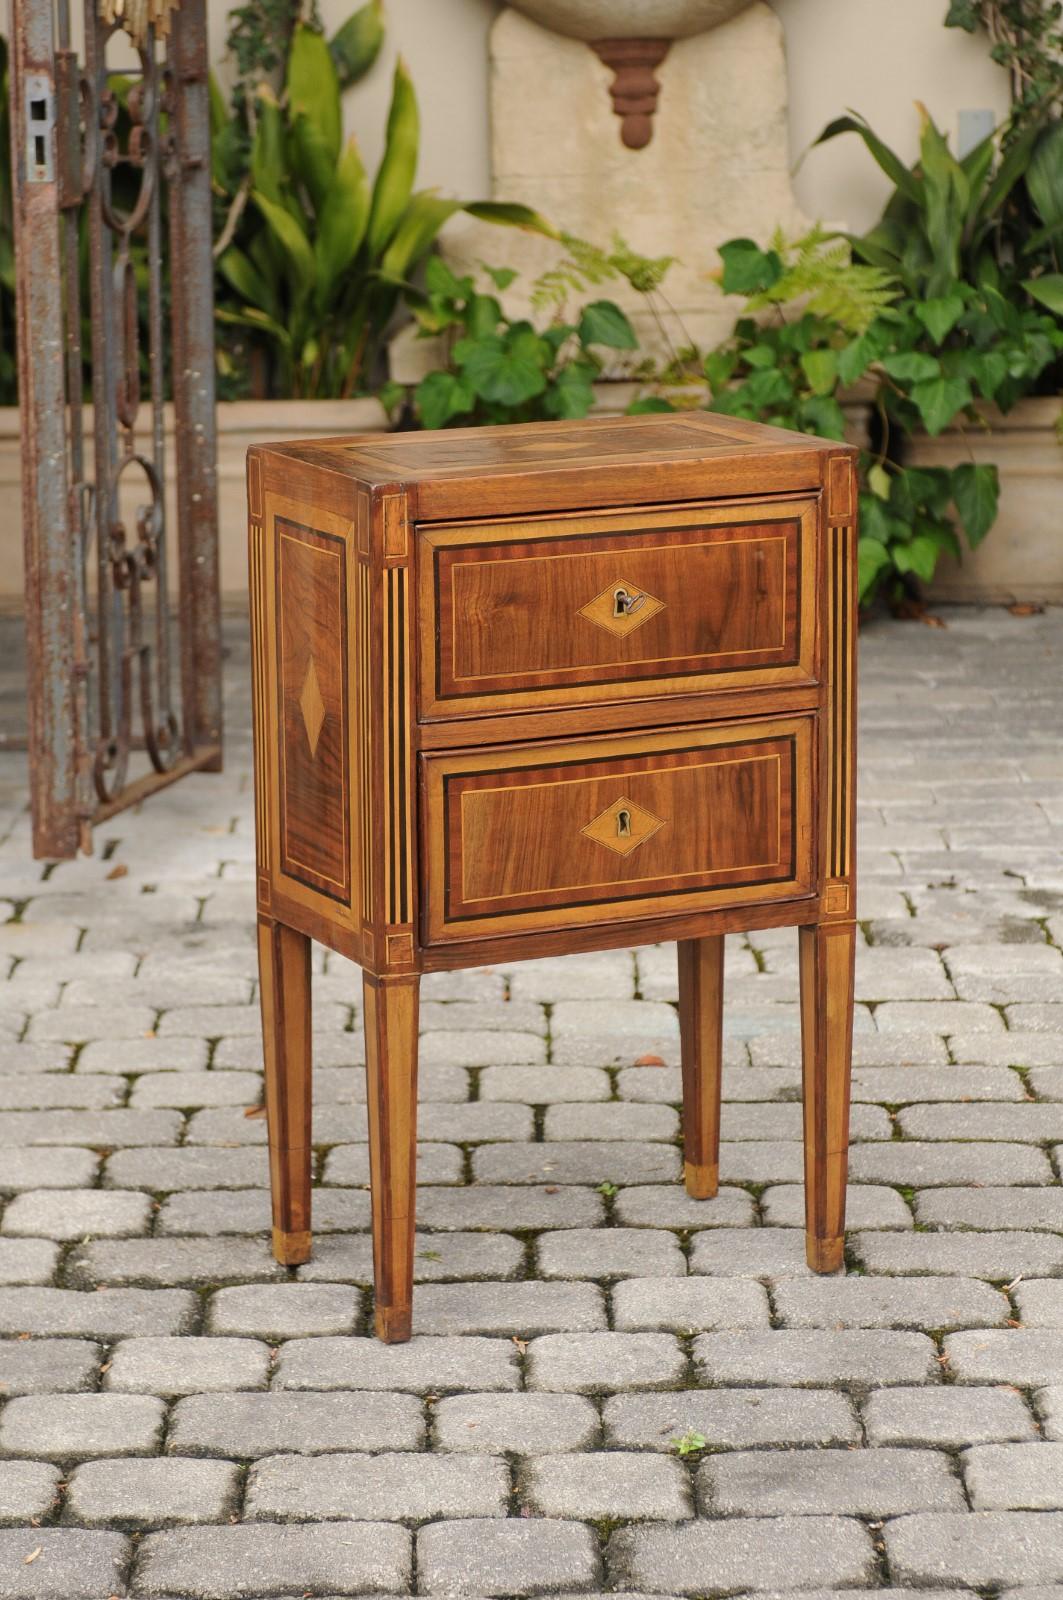 Petite Italian neoclassical period walnut commode from the late 18th century, with two drawers, delicate inlay and tapered legs. This exquisite Italian commodino features a rectangular top, adorned with a central inlaid diamond motif, surrounded by